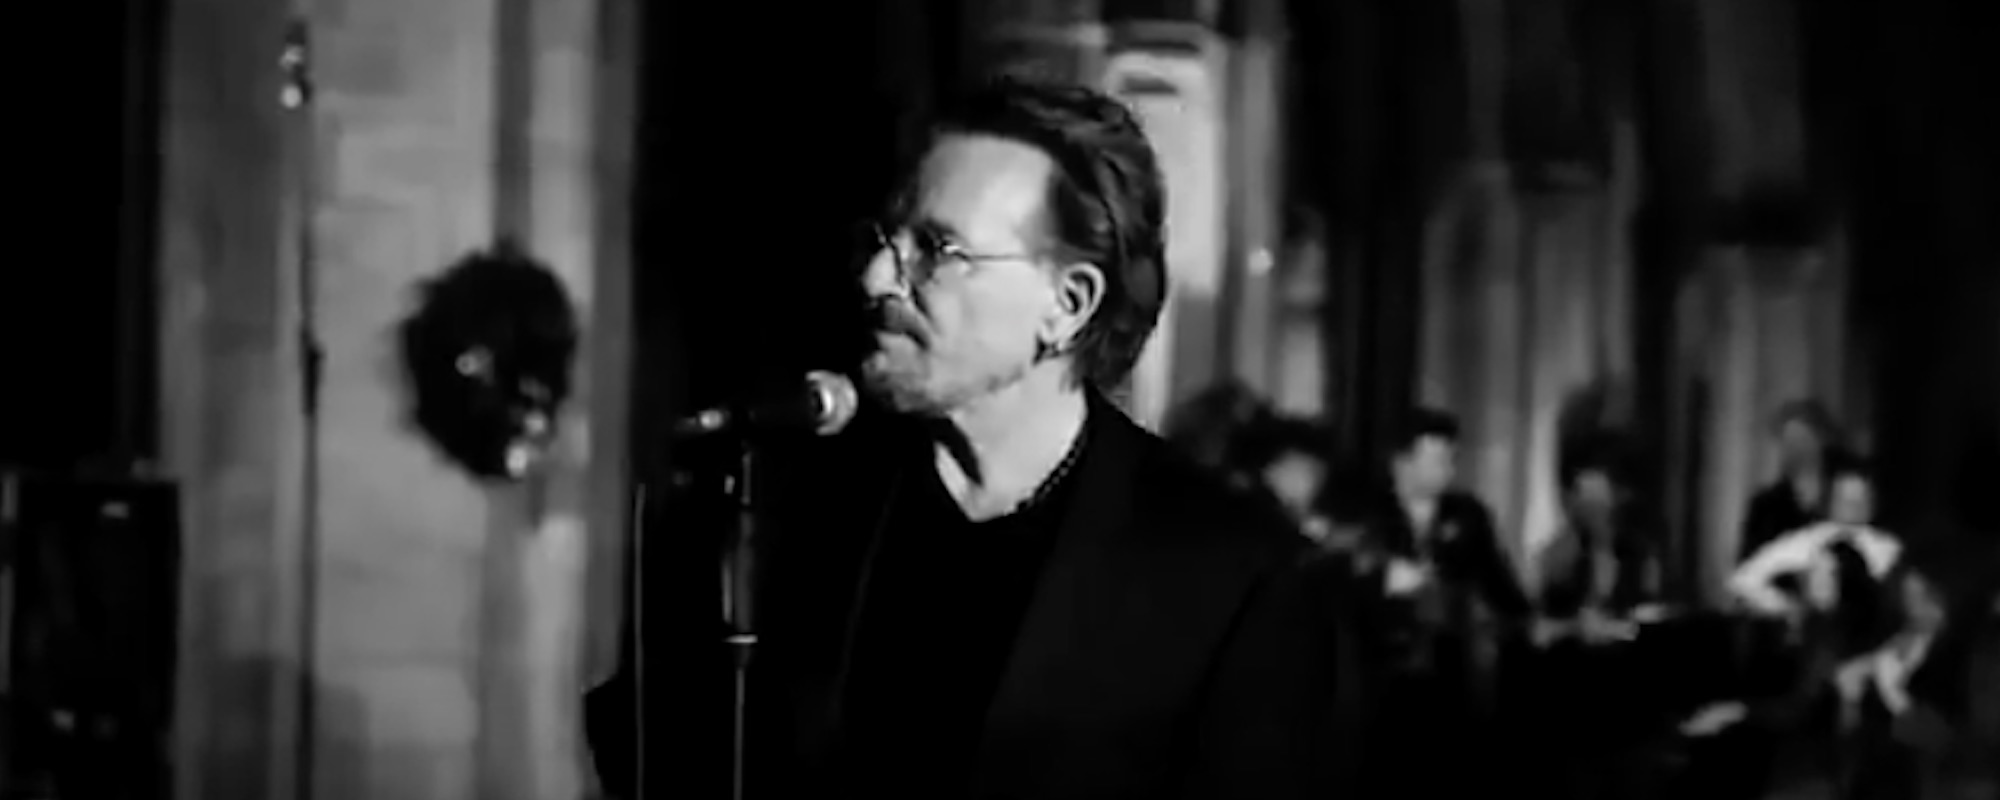 Bono ‘Busks’ for Charity in Dublin, Performs U2’s “Running to Stand Still”